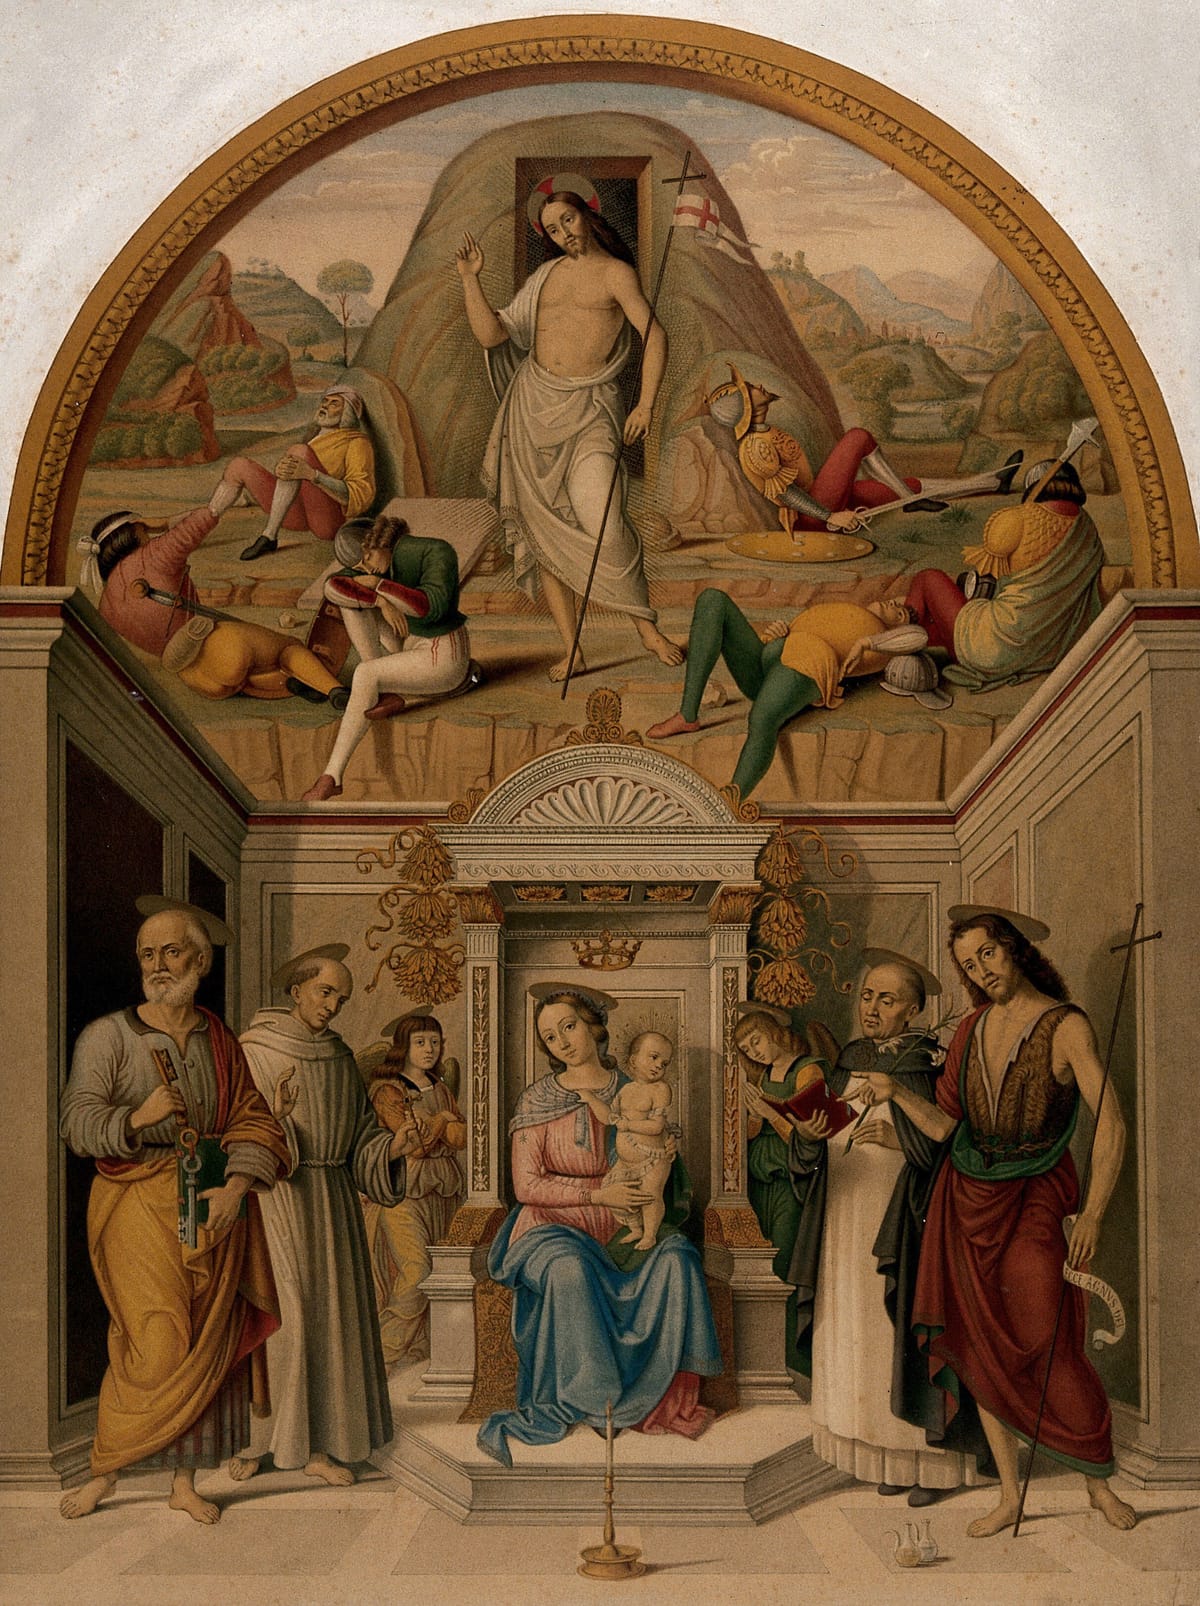 The Virgin with Christ Child enthroned with Saints Peter, Francis, Dominic and John the Baptist; above, the Resurrection of Christ - 1800s Chromolithograph by L. Gruner after G. Sanzio - Public Domain Catholic Painting